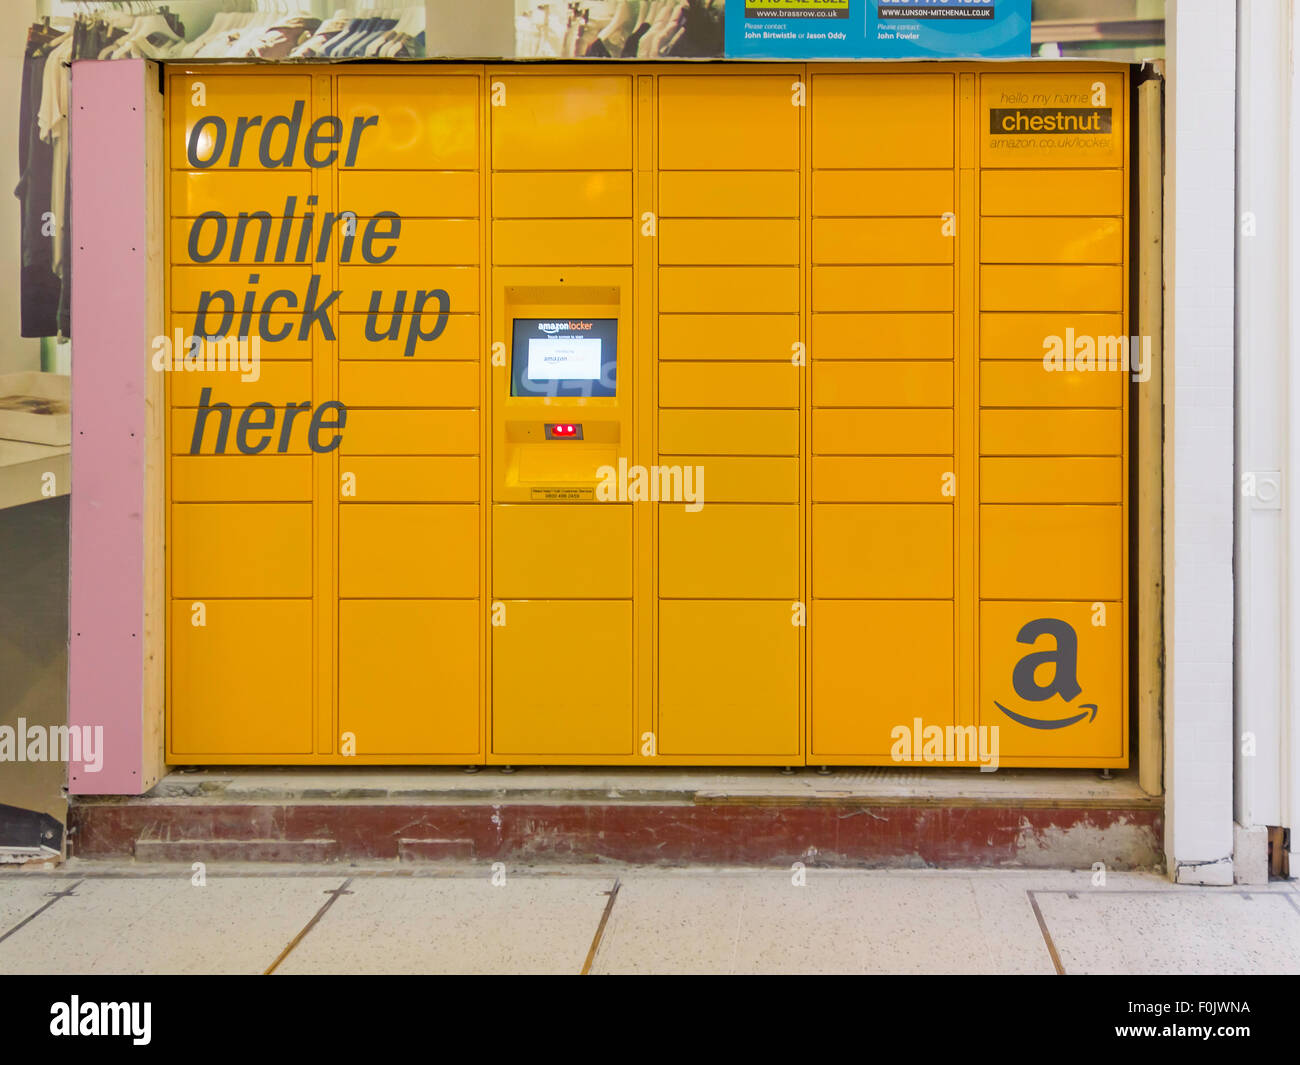 Chestnut an Amazon Locker for delivery of goods ordered on line in a shopping Arcade Stock Photo